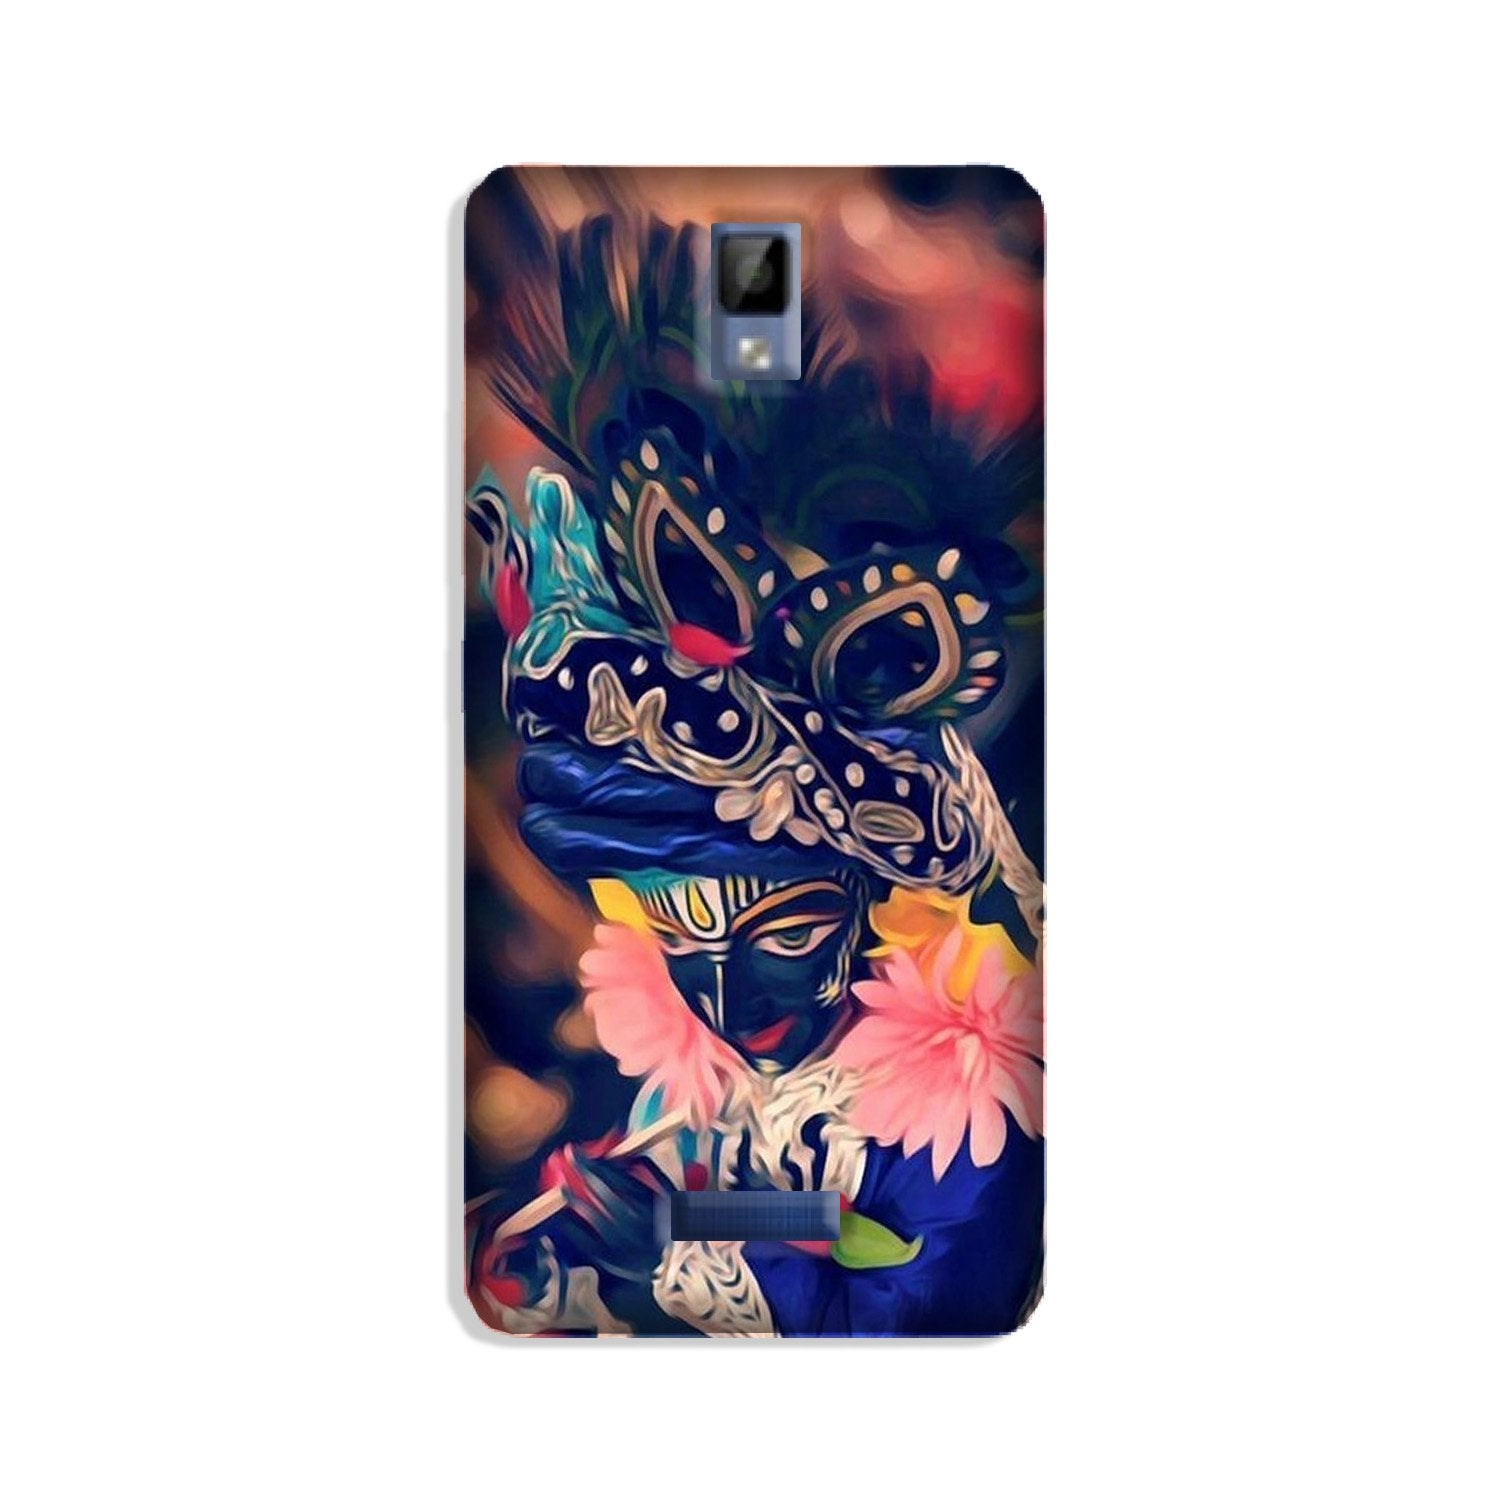 Lord Krishna Case for Gionee P7